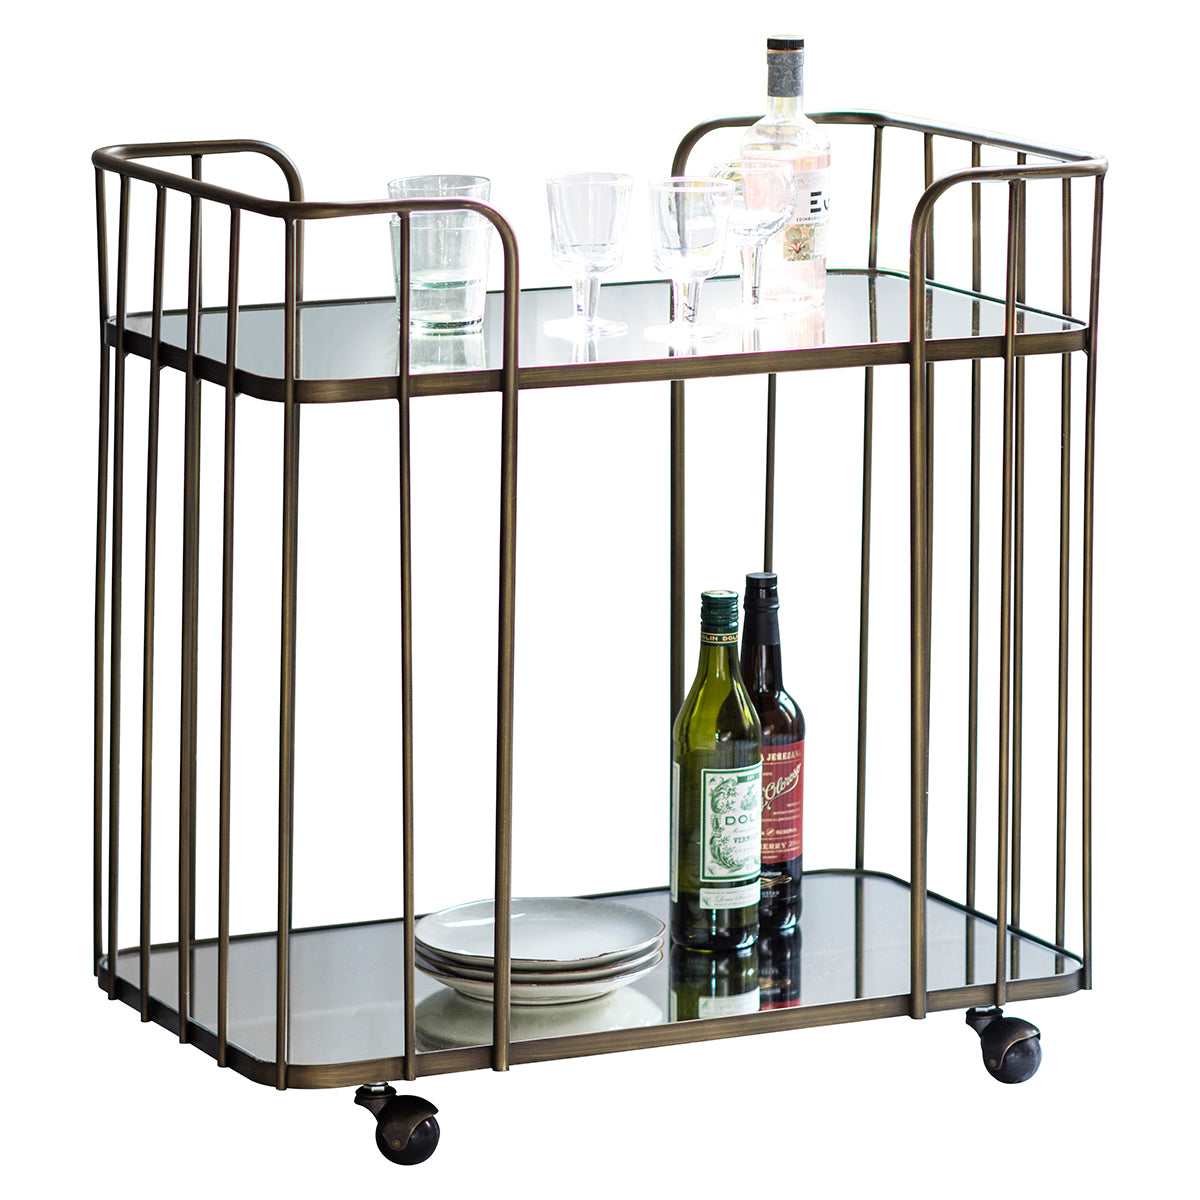 A home furniture piece, the Verna Drinks Trolley from Kikiathome.co.uk, is a bronze trolley measuring 750x457x787mm adorned with wine bottles, serving as an